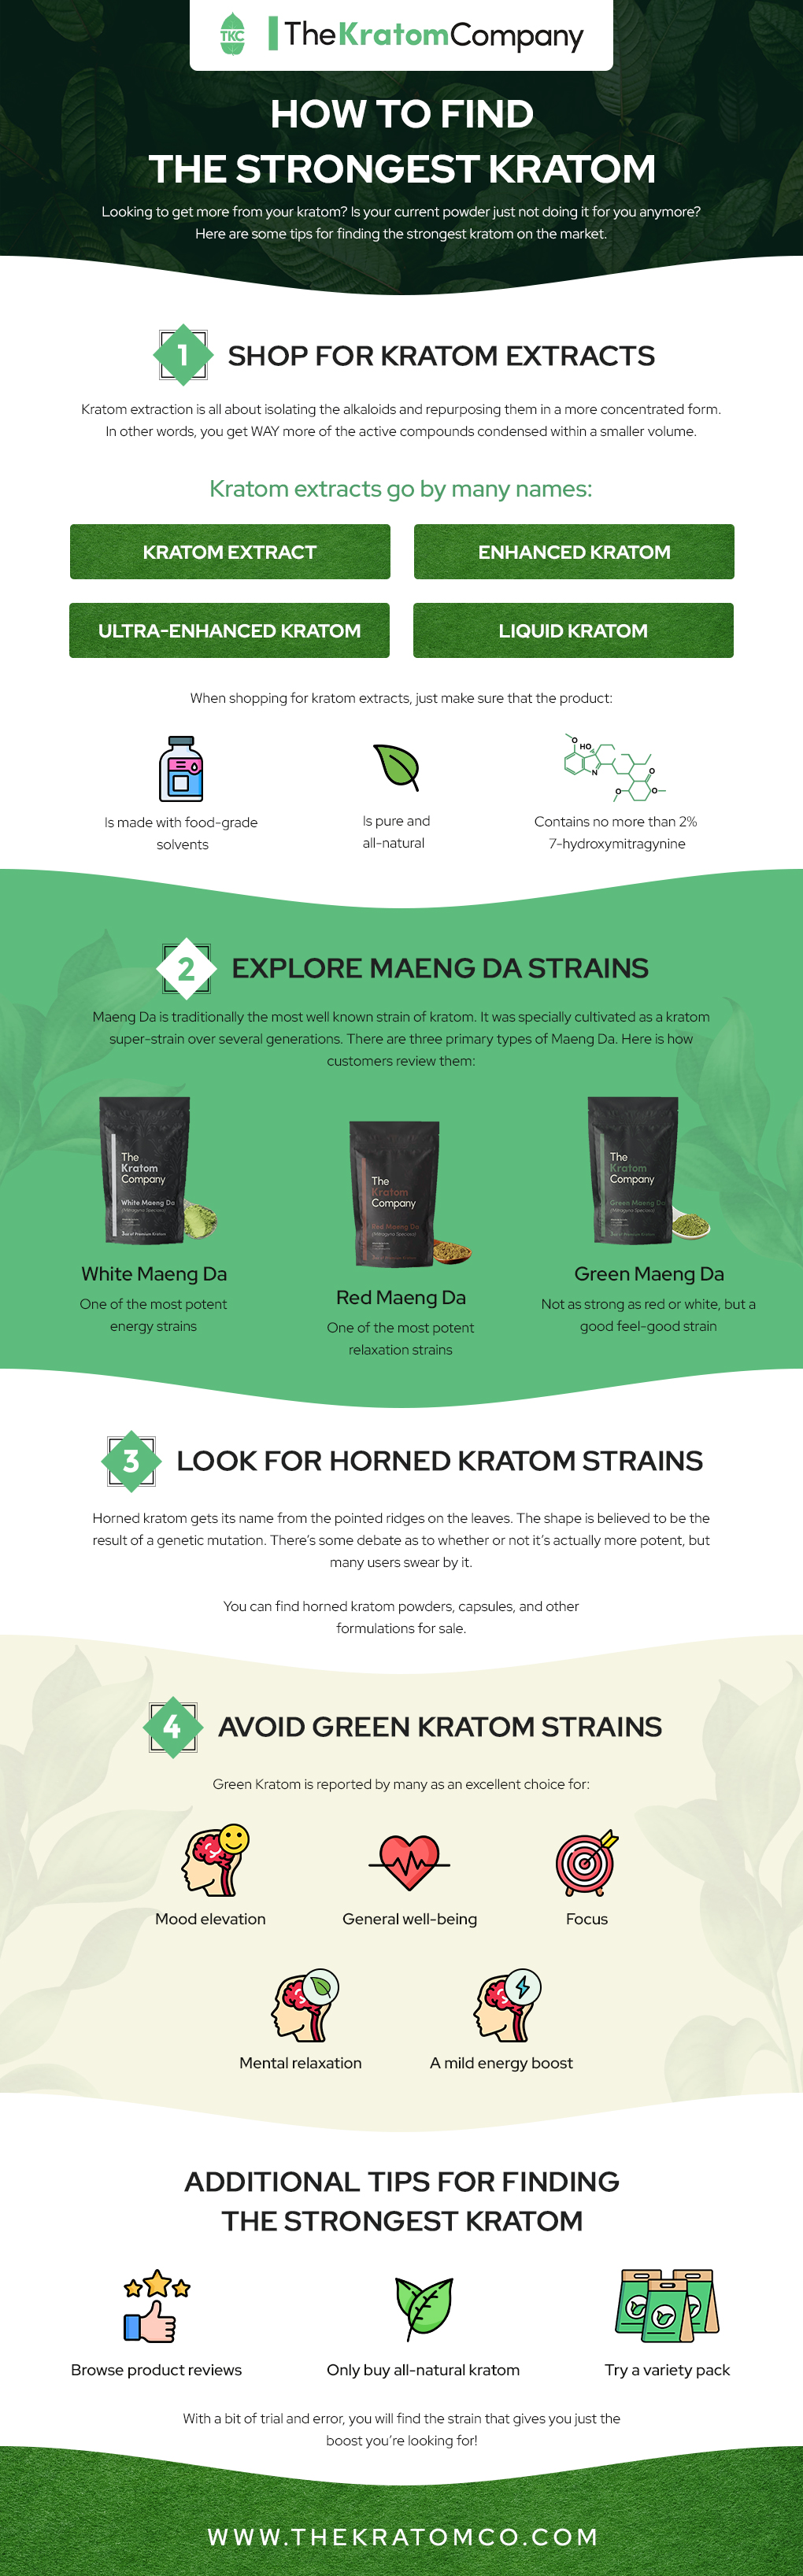 A TKC Infographic on how to find the strongest Kratom